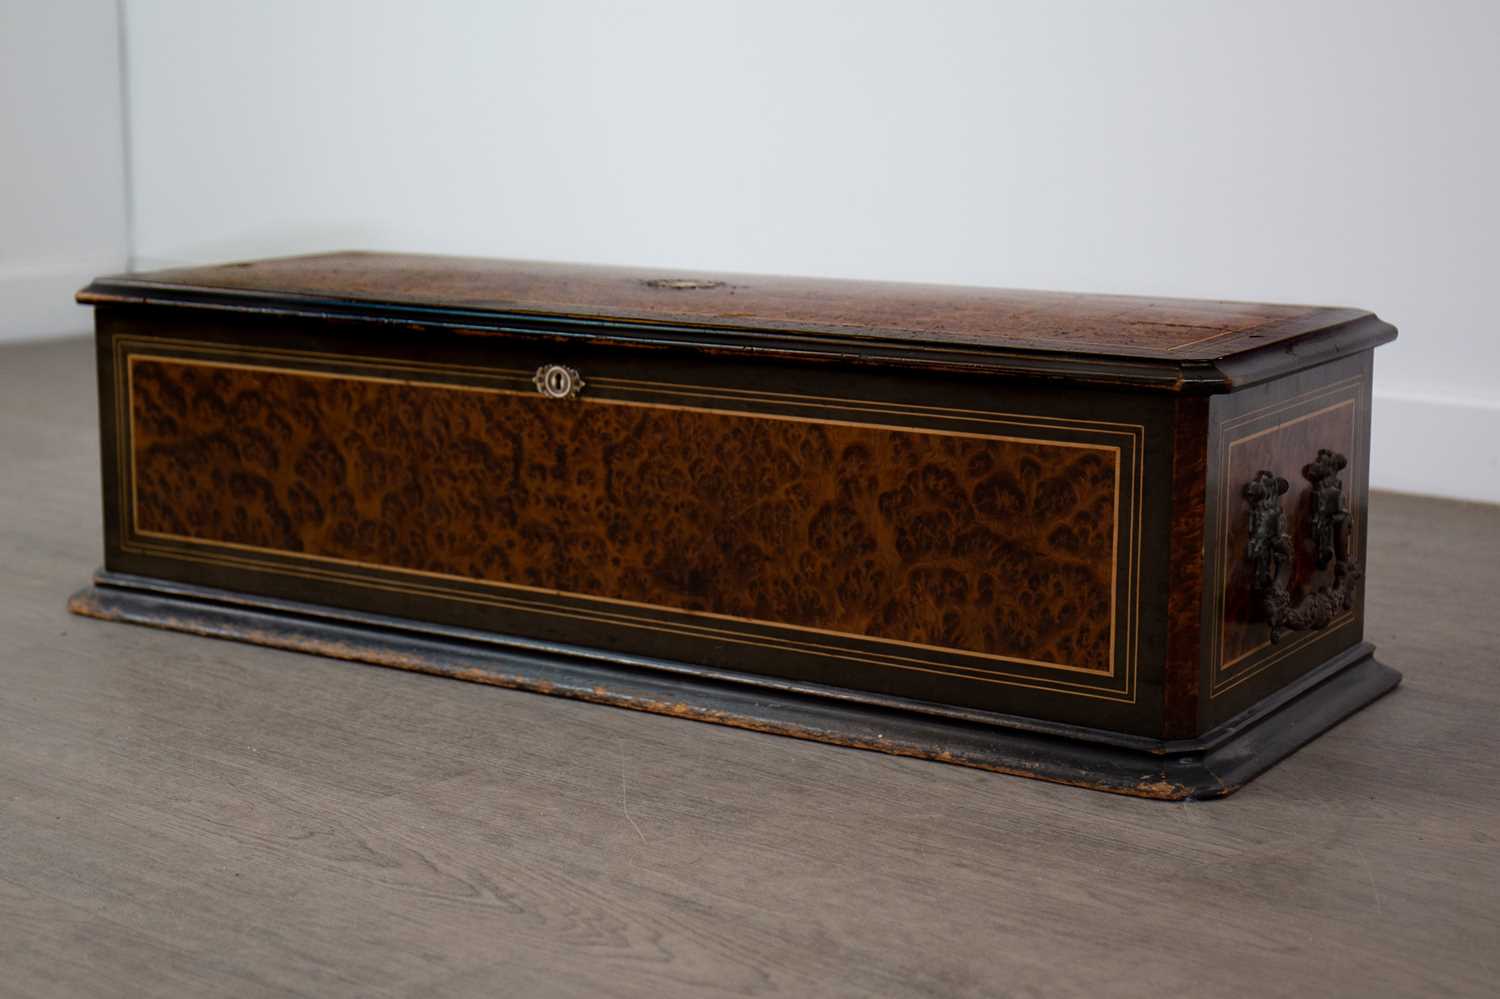 Lot 651 - A LARGE VICTORIAN BURR WALNUT AND EBONISED CYLINDER MUSIC BOX